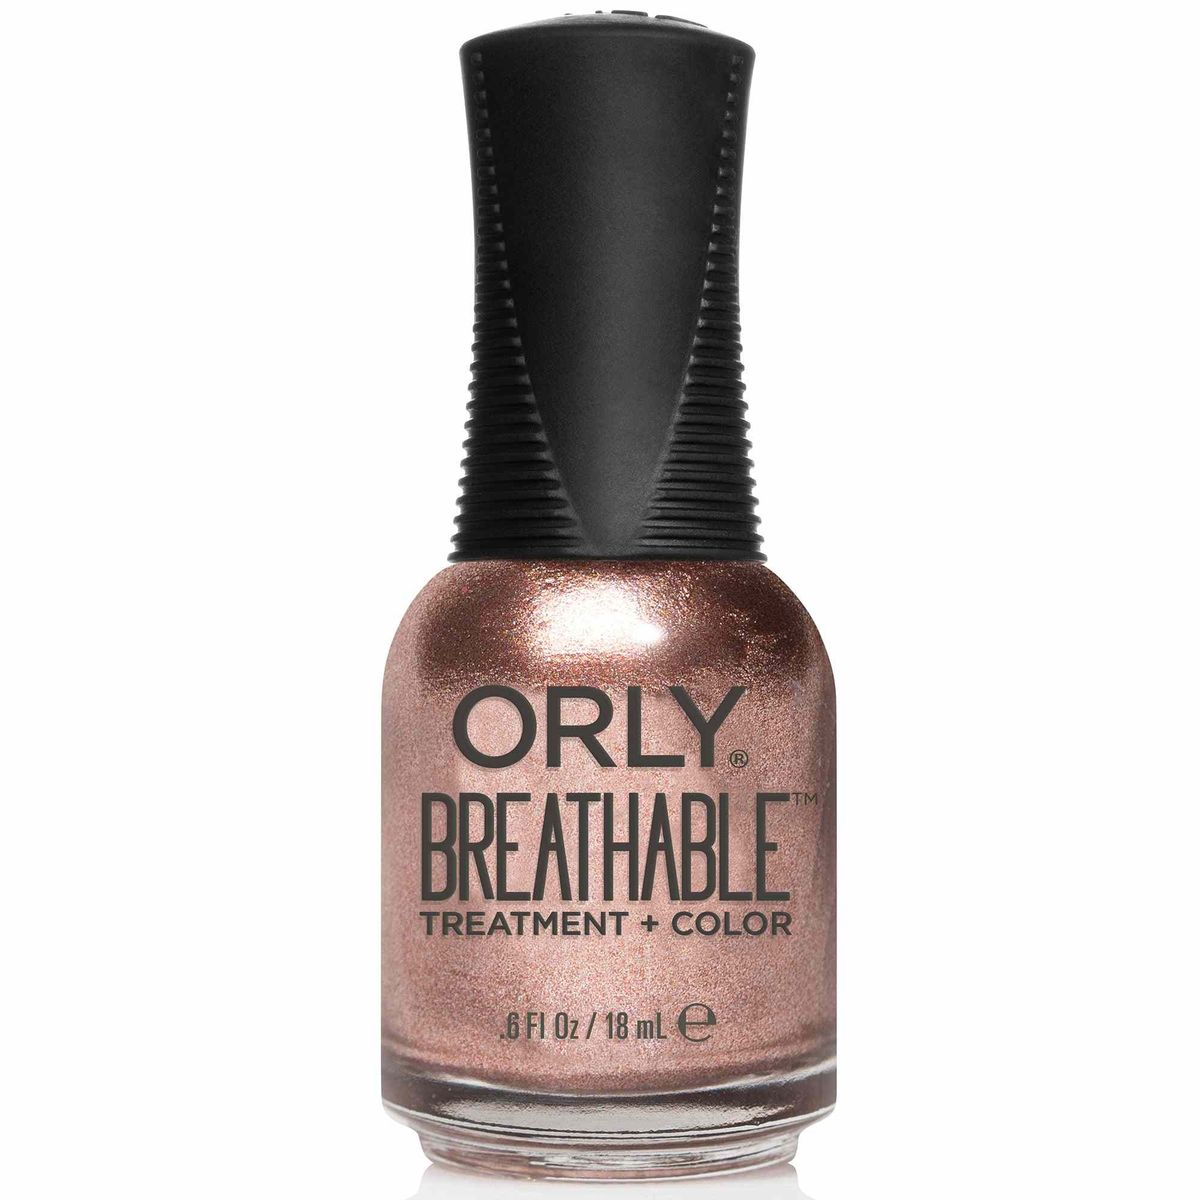 Tratamiento Orly transpirable + color